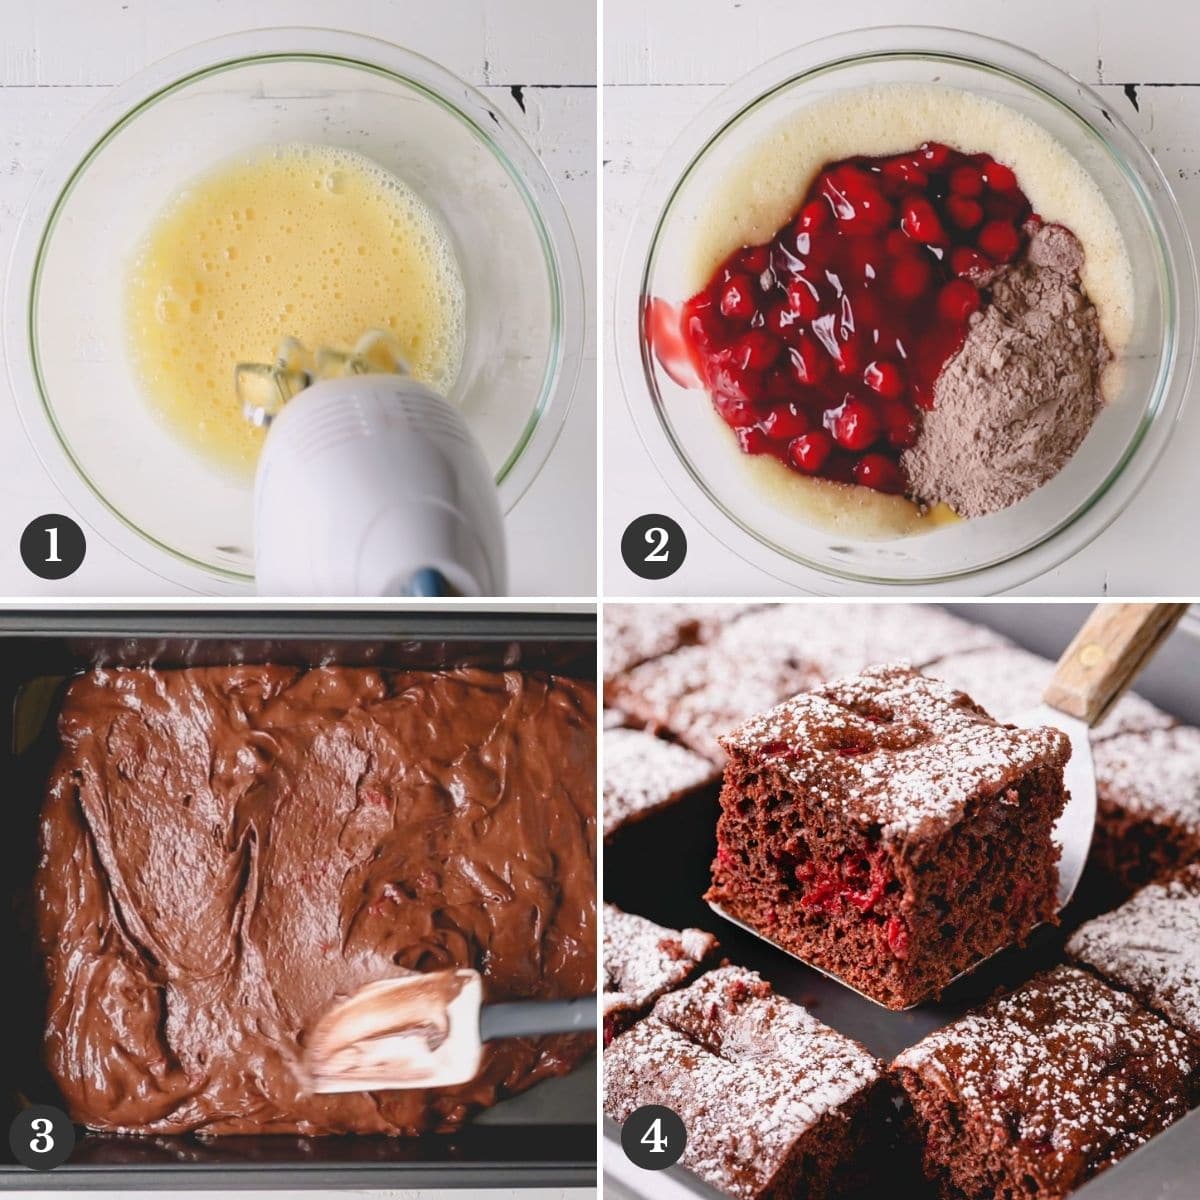 Step by step photos of making cherry chocolate cake.